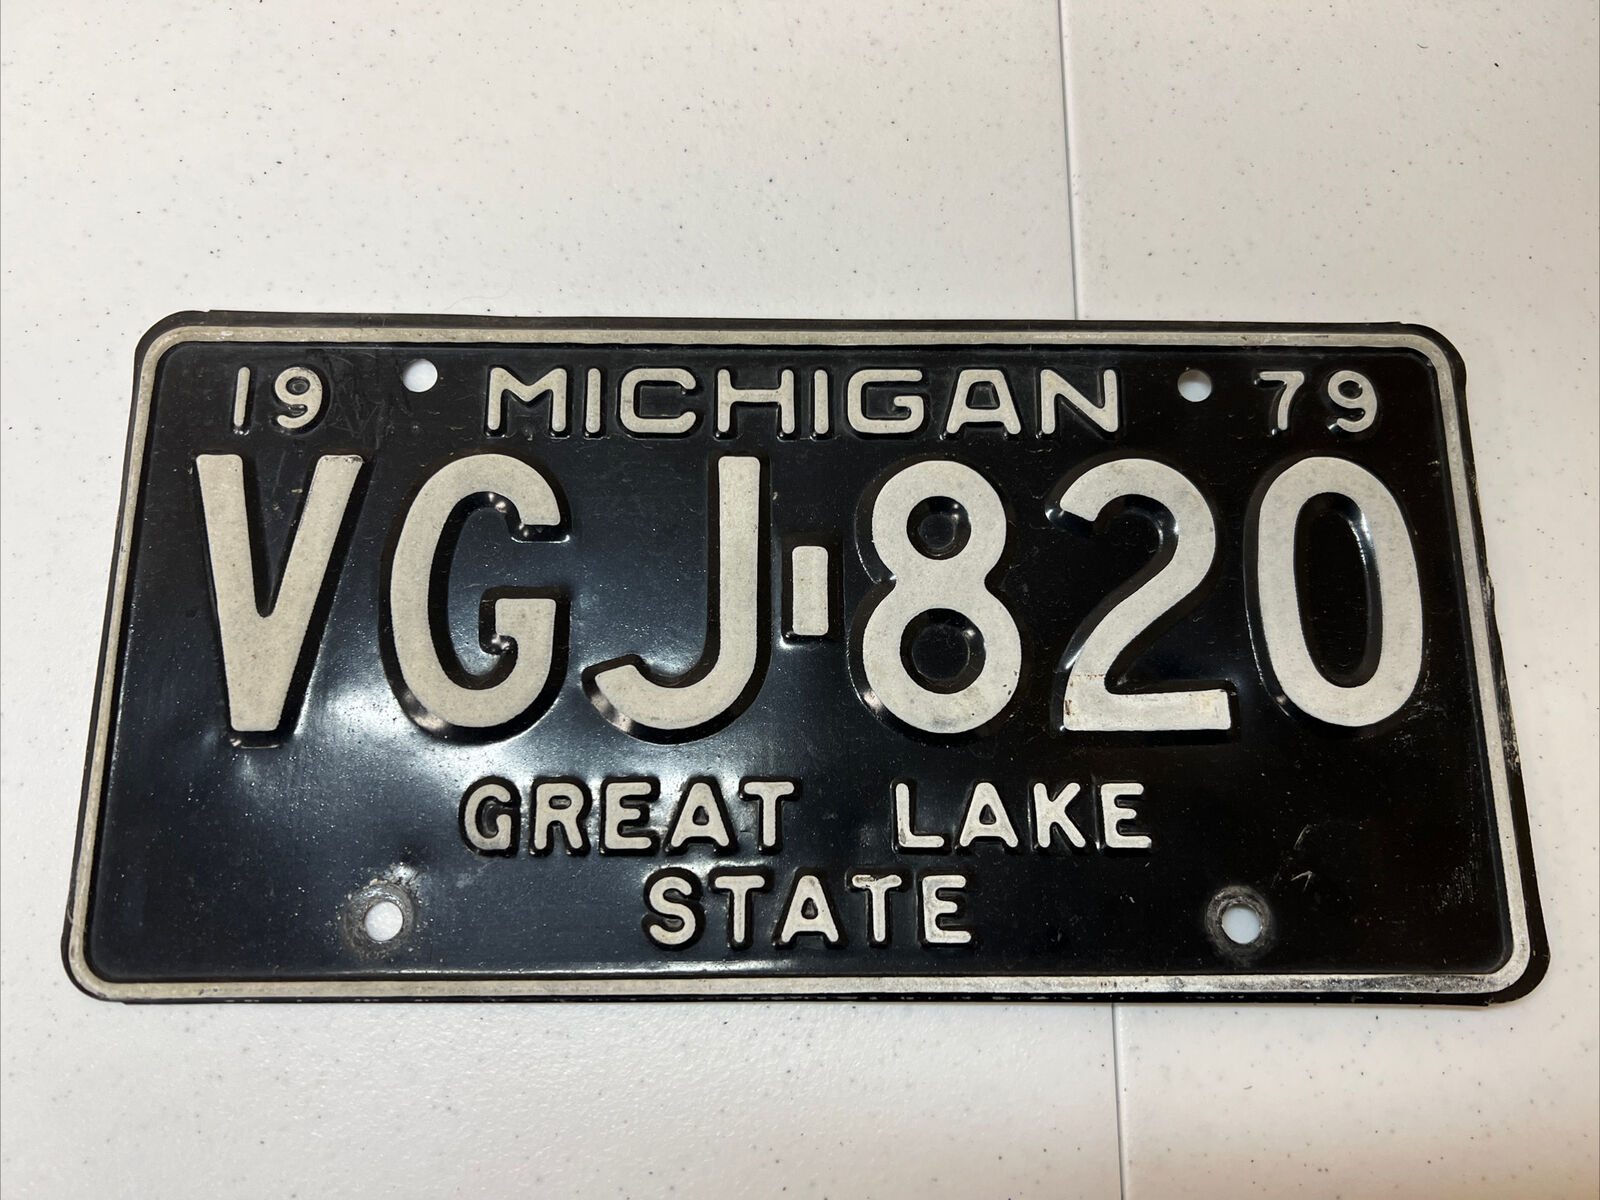 Vintage 1979 Michigan License Plate With Tags - VGJ 820